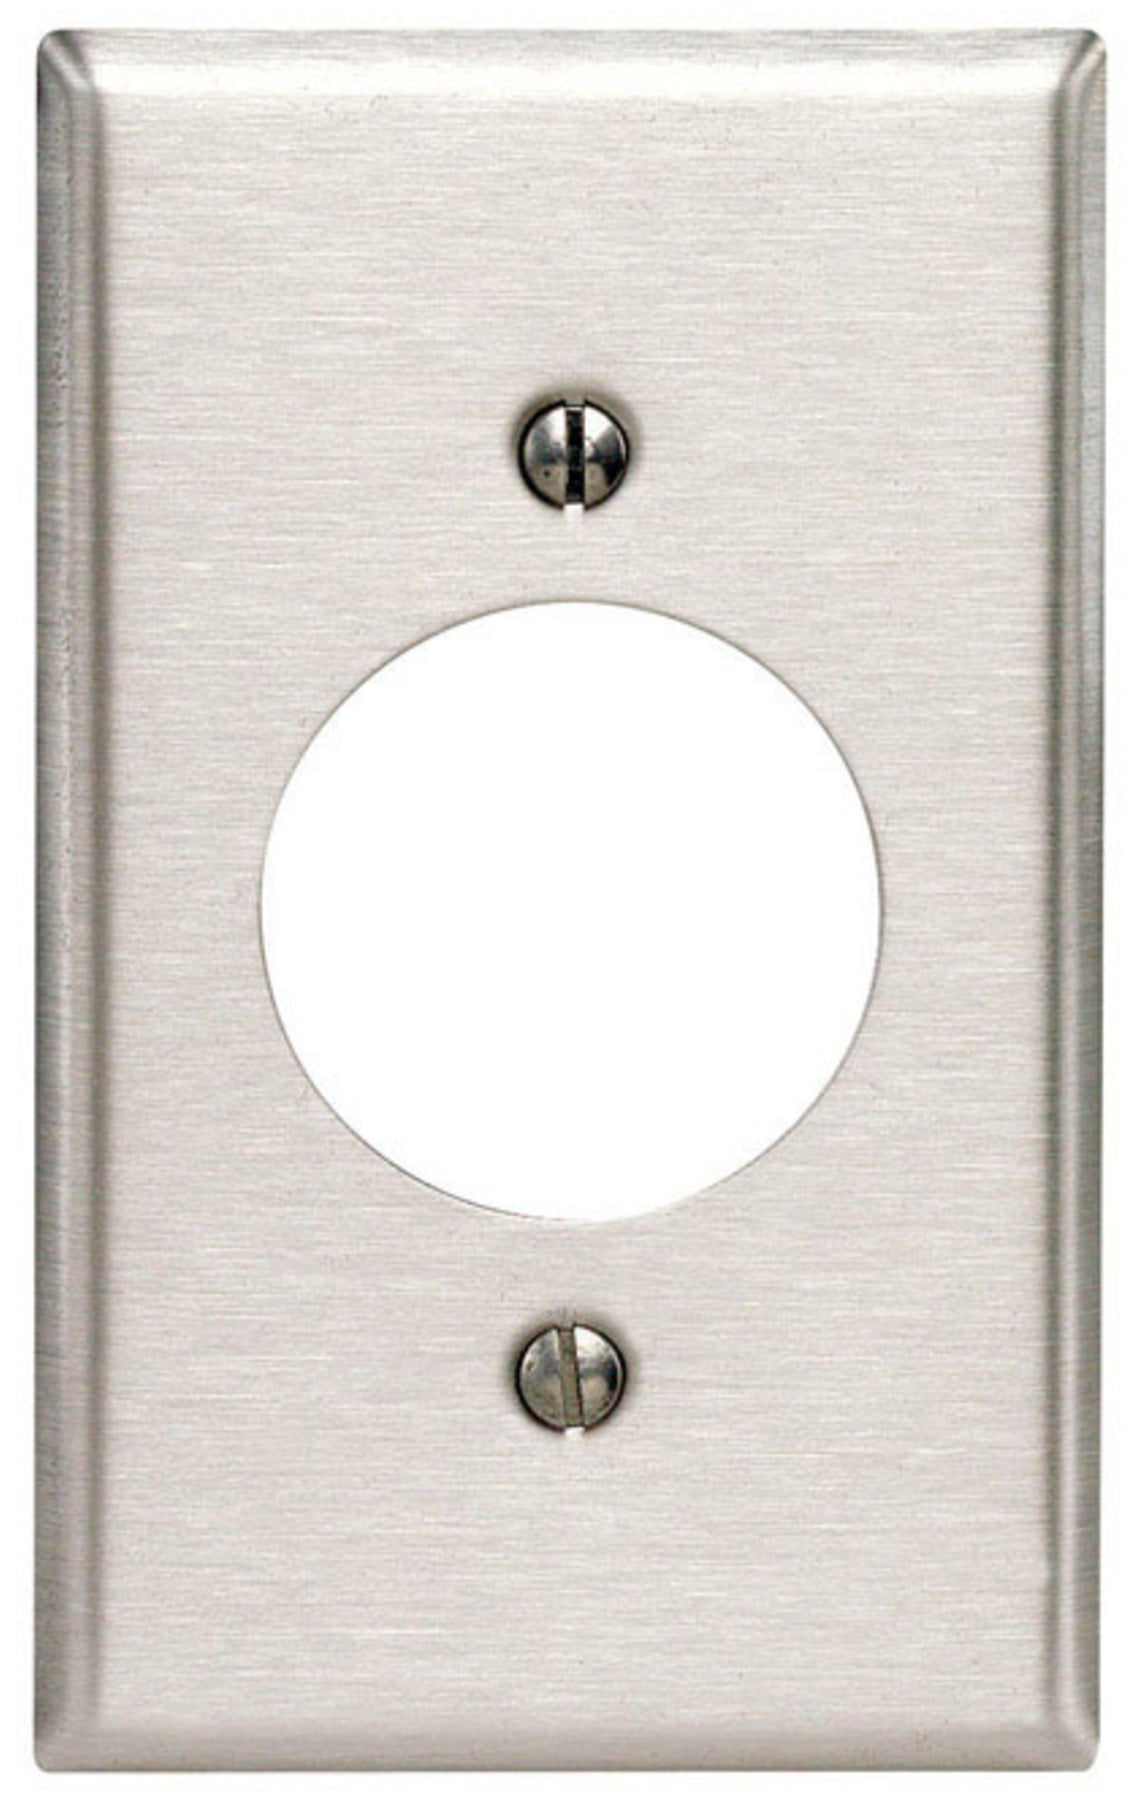 Leviton 84020-040 Commercial Outlet Wall Plate, Silver